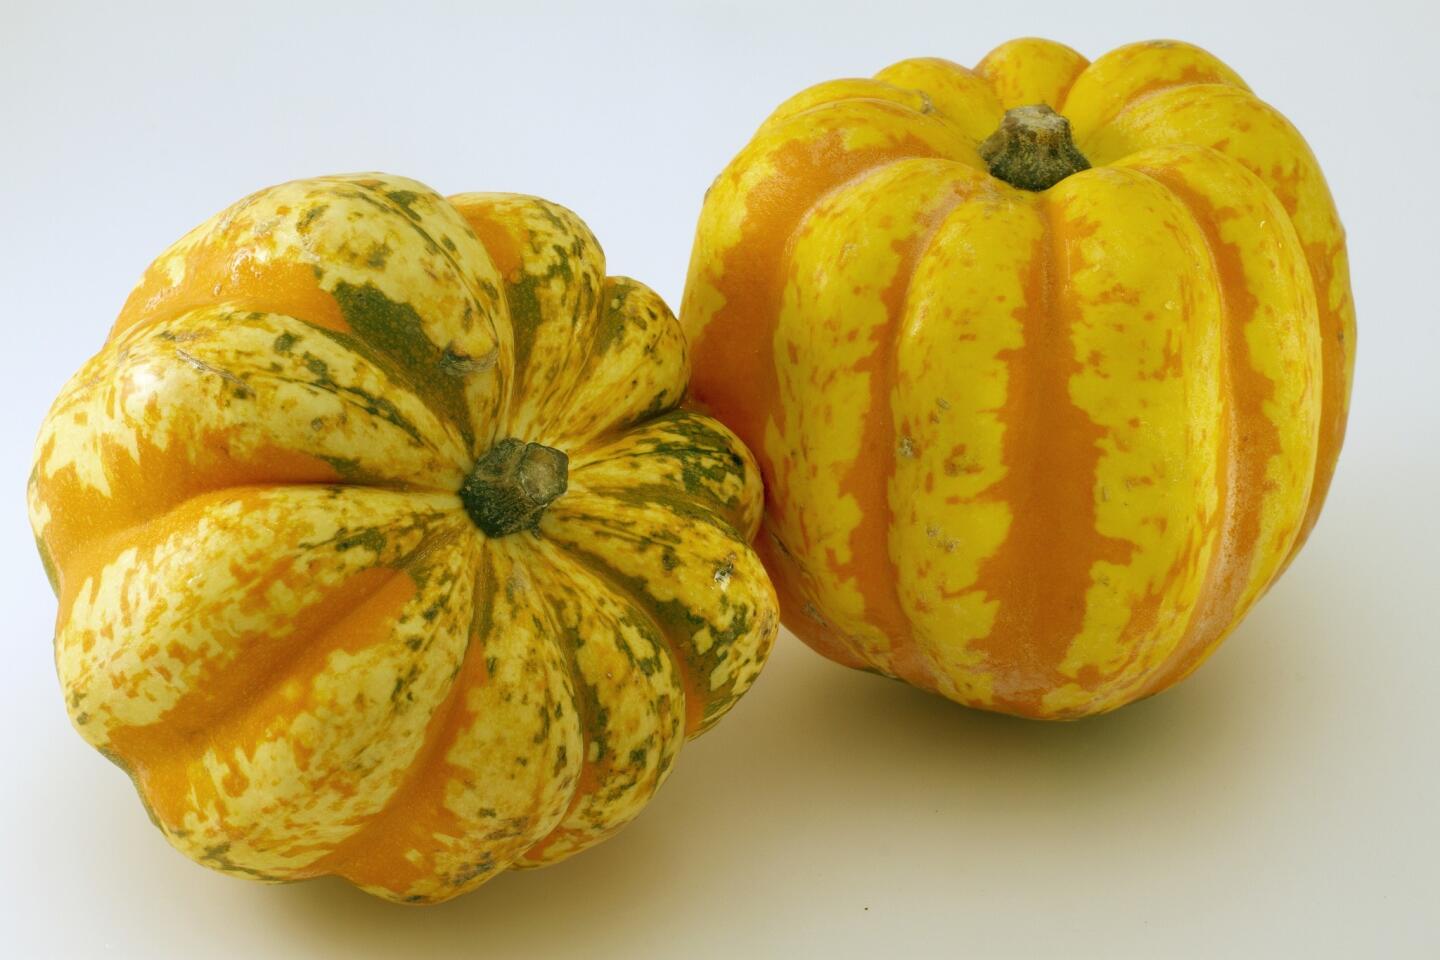 Winter squash, harvested in the fall months, is different from summer squash because it's eaten in the mature fruit stage. Here are a few varieties to try.